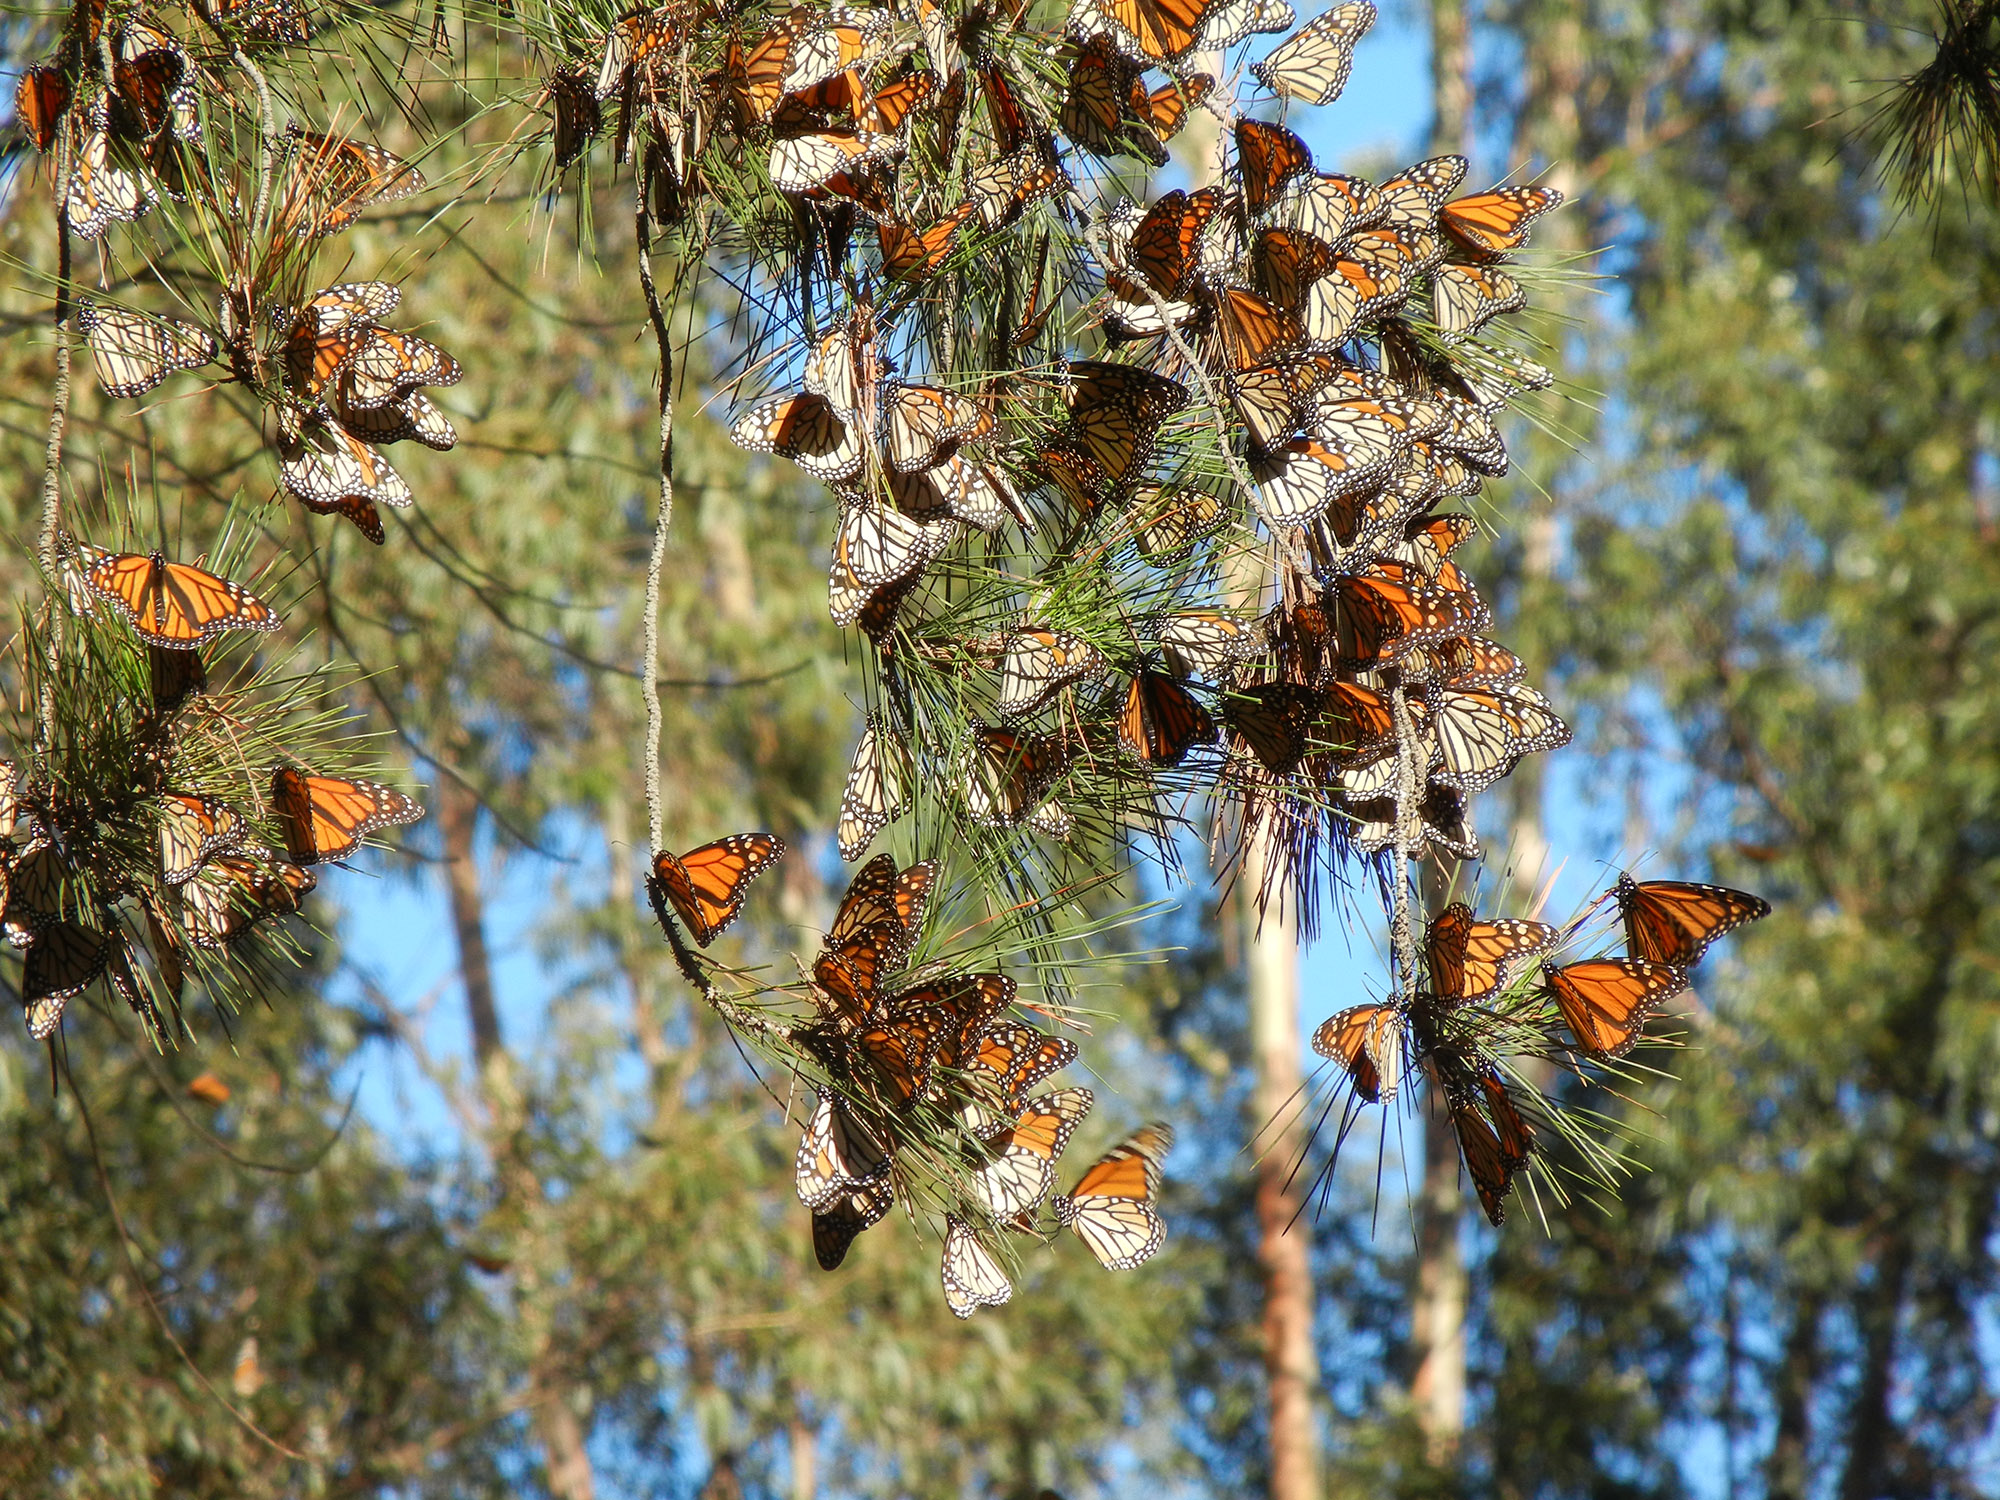 AN overwintering cluster of monarch butterflies in a Monterey pine tree.